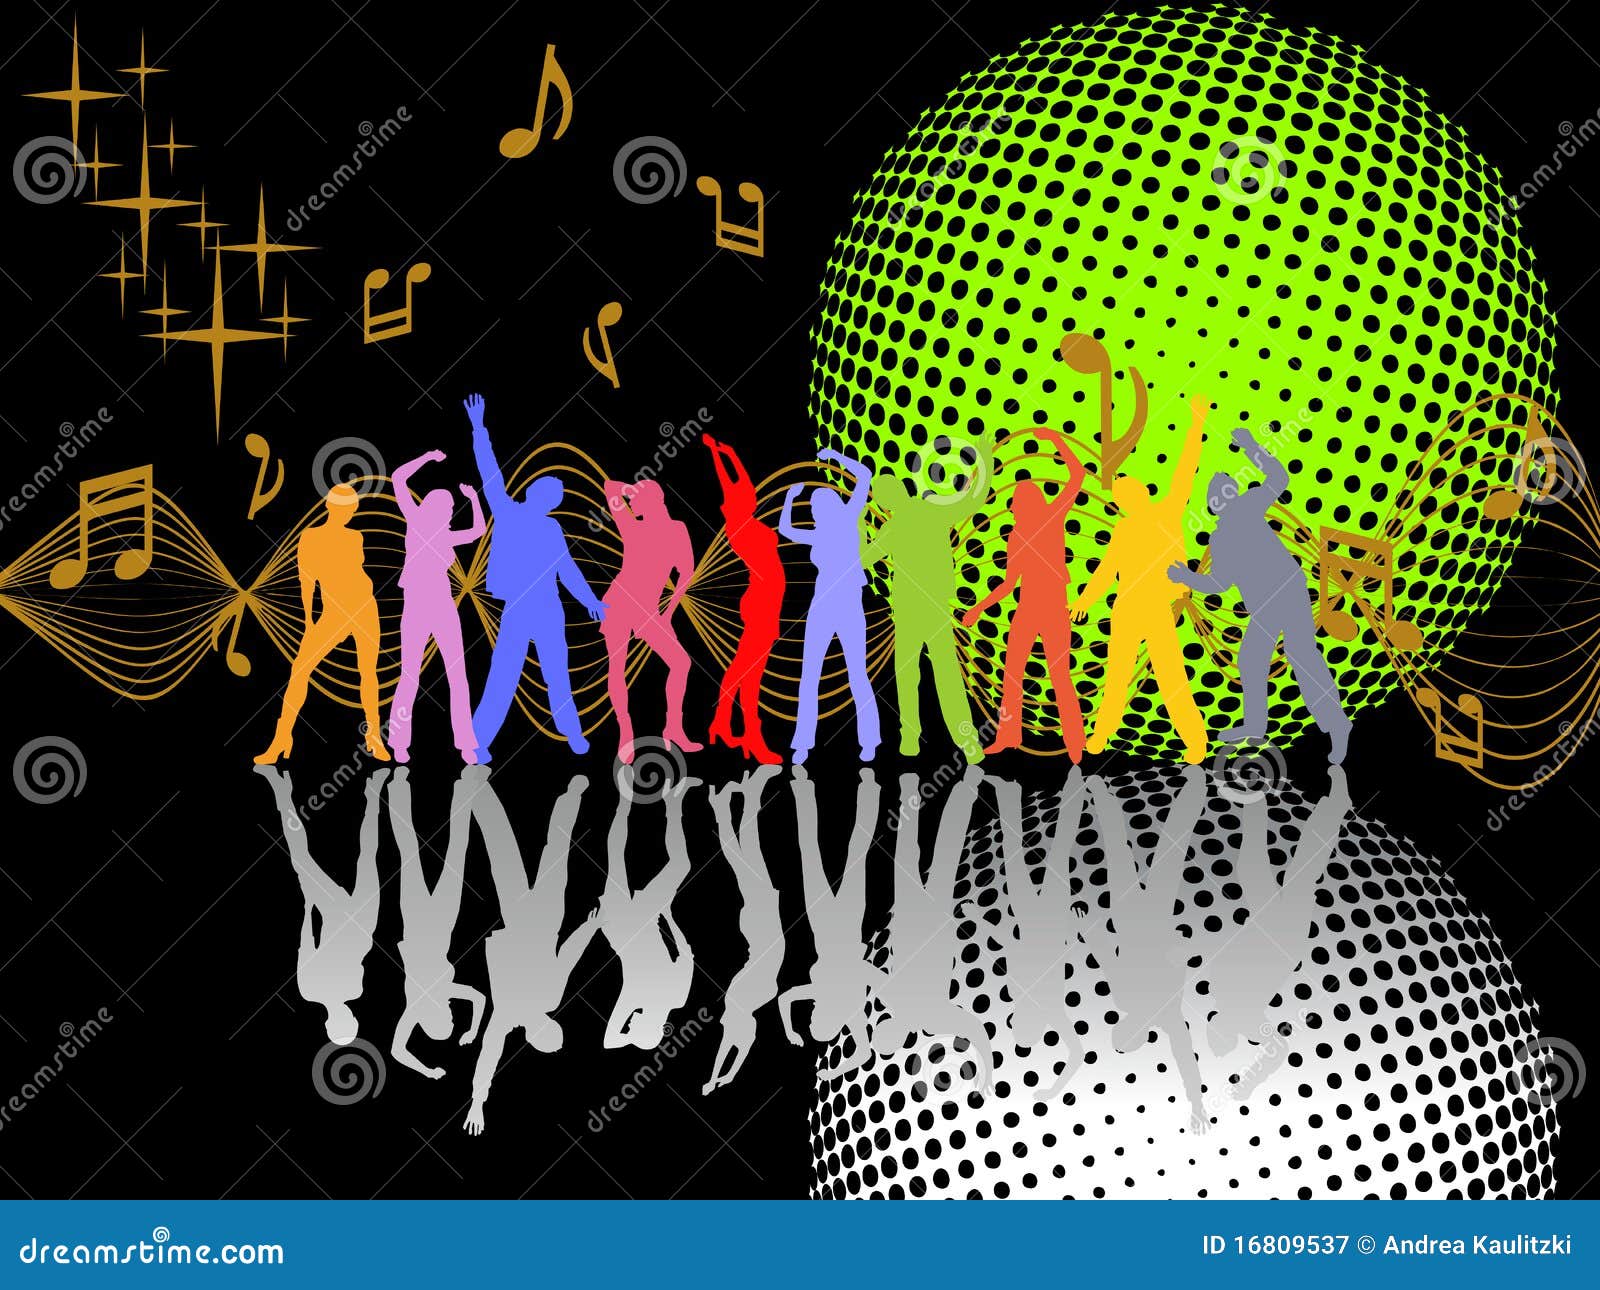 Party poster stock vector. Illustration of nightlife - 16809537